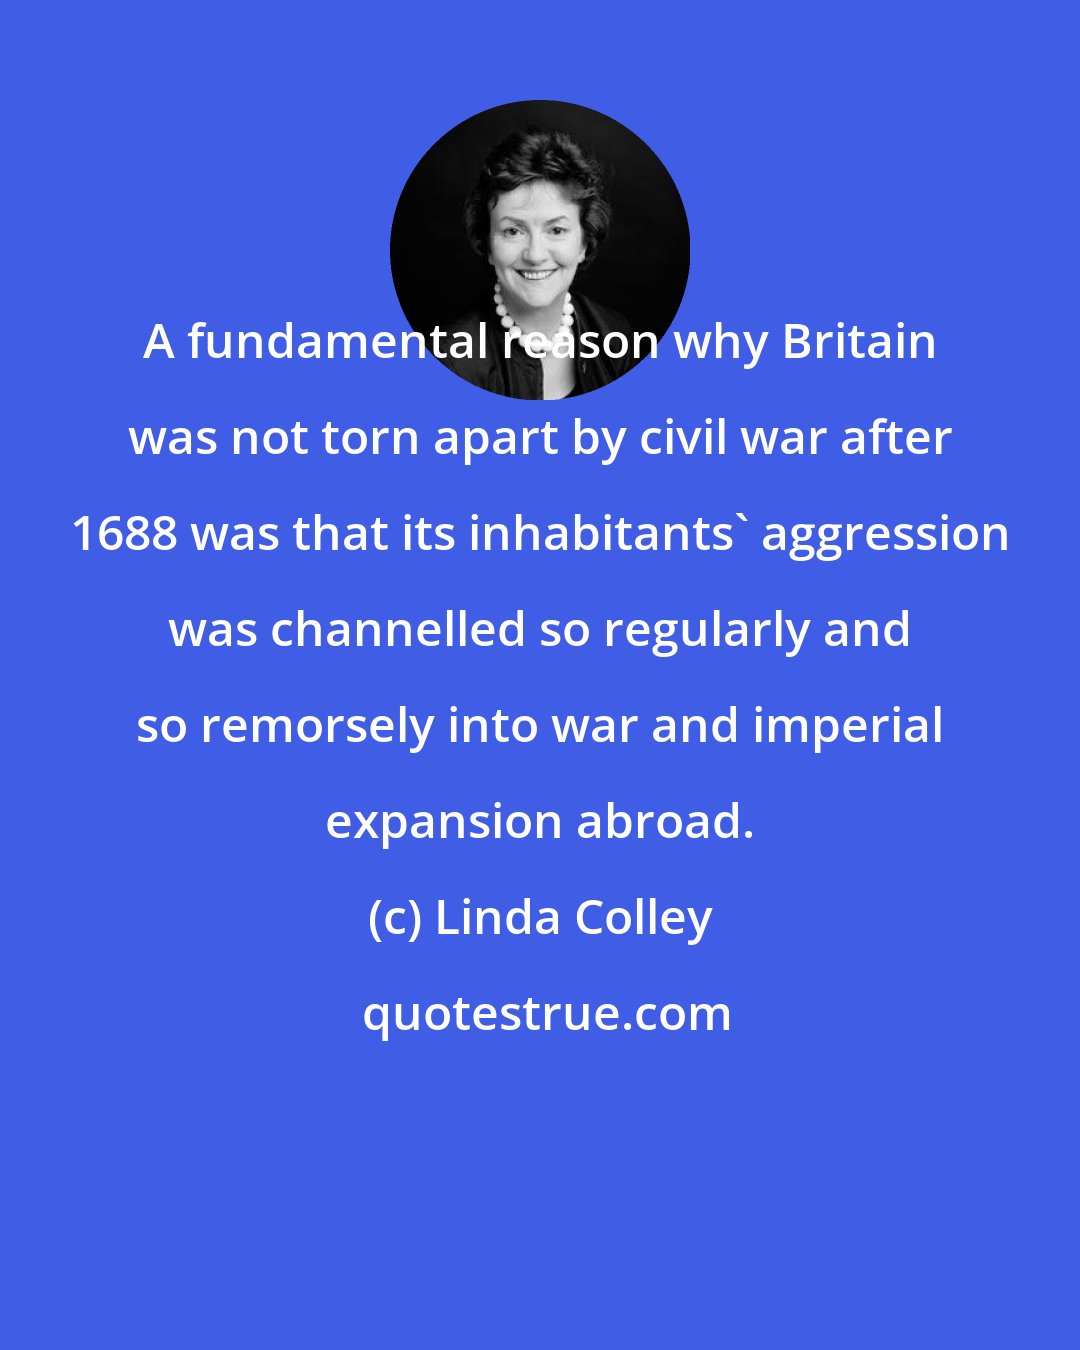 Linda Colley: A fundamental reason why Britain was not torn apart by civil war after 1688 was that its inhabitants' aggression was channelled so regularly and so remorsely into war and imperial expansion abroad.